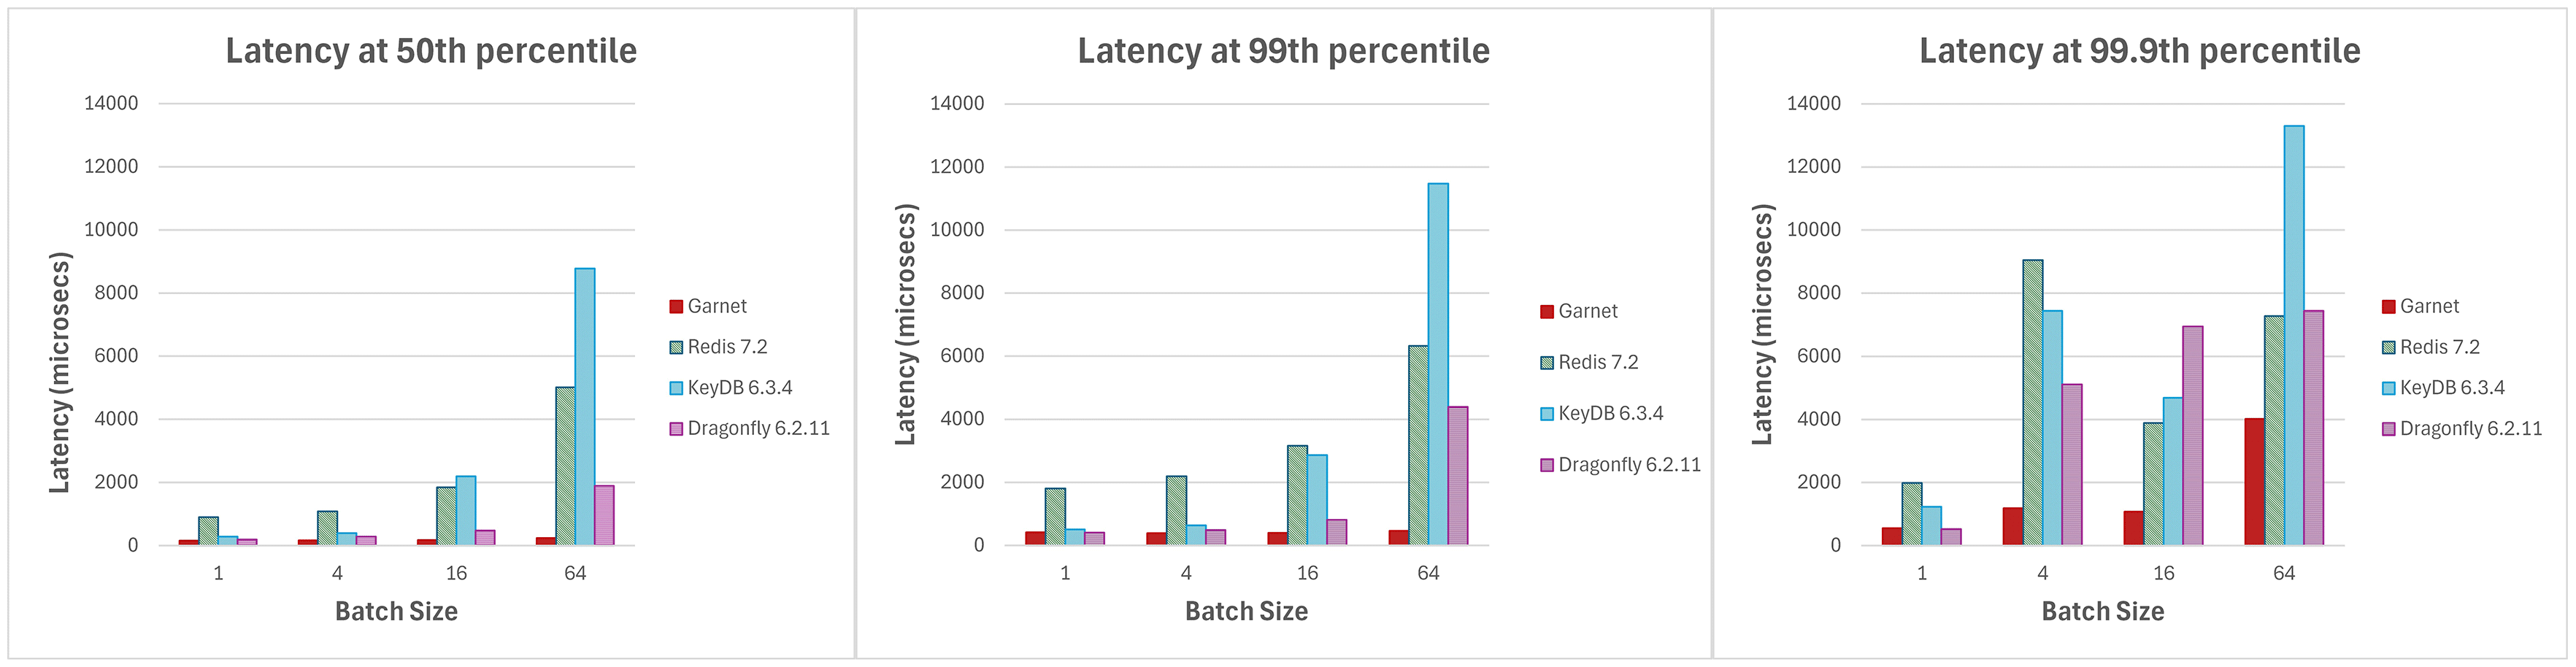 Three clustered column bar graphs comparing the latency of various systems (Garnet, Redis, KeyDB, and Dragonfly) at median, 99th percentile, and 99.9th percentile respectively. The x-axis varies the batch size from 1 to 64, with 128 client sessions connected, and an operation mix of 80% GET and 20% SET. Garnet’s latency is shown to be stable and generally lower across the board.